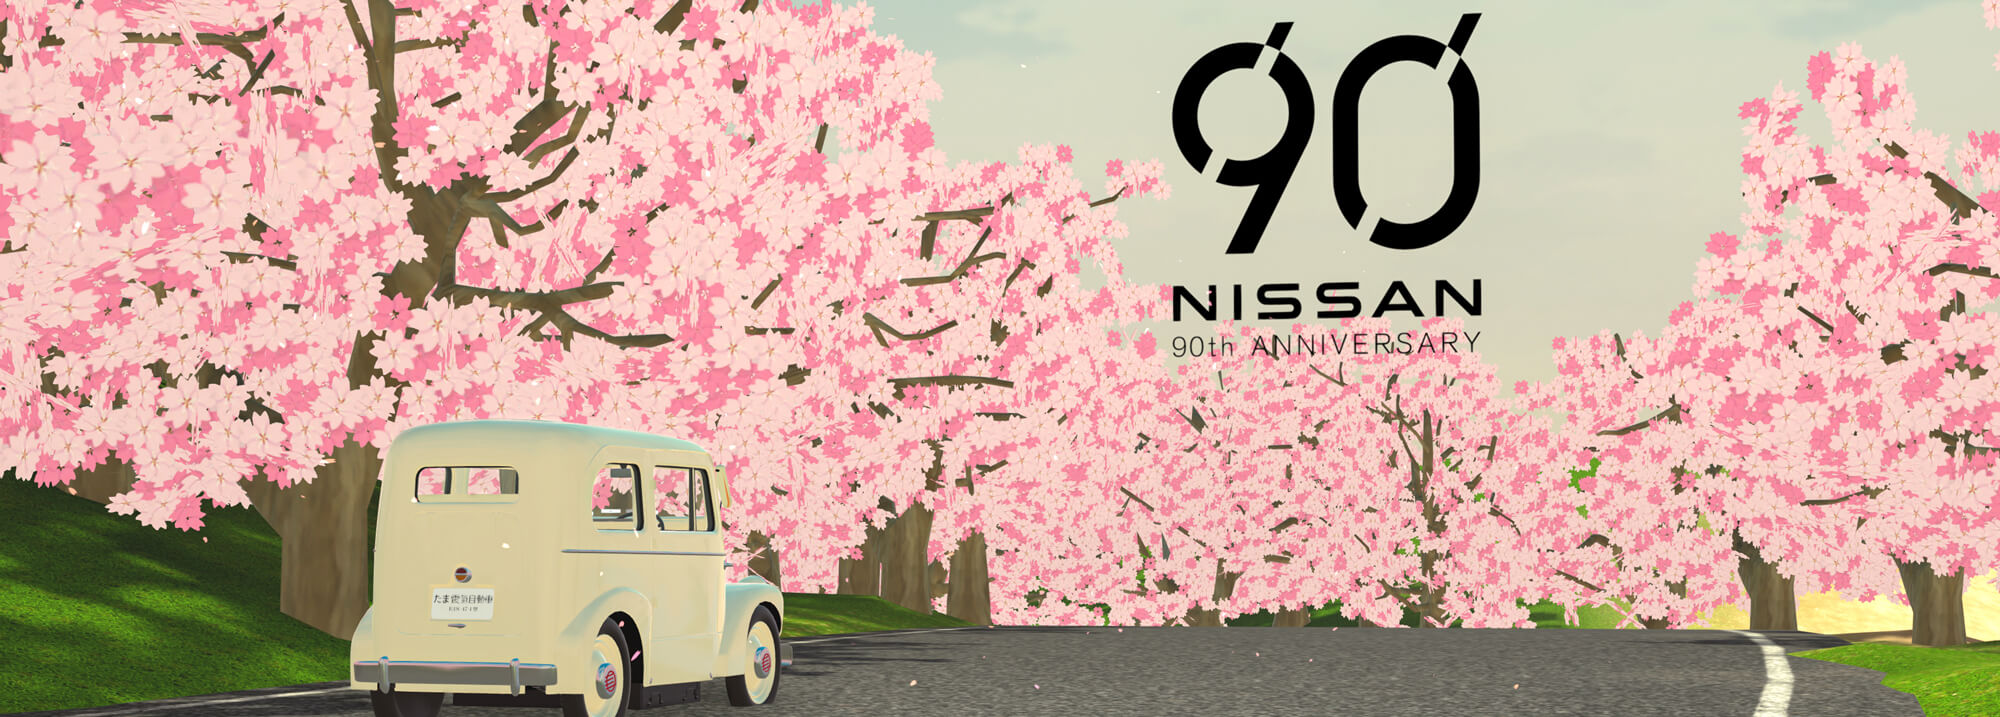 Nissan looks back on 90 years of passion and innovation video-banner